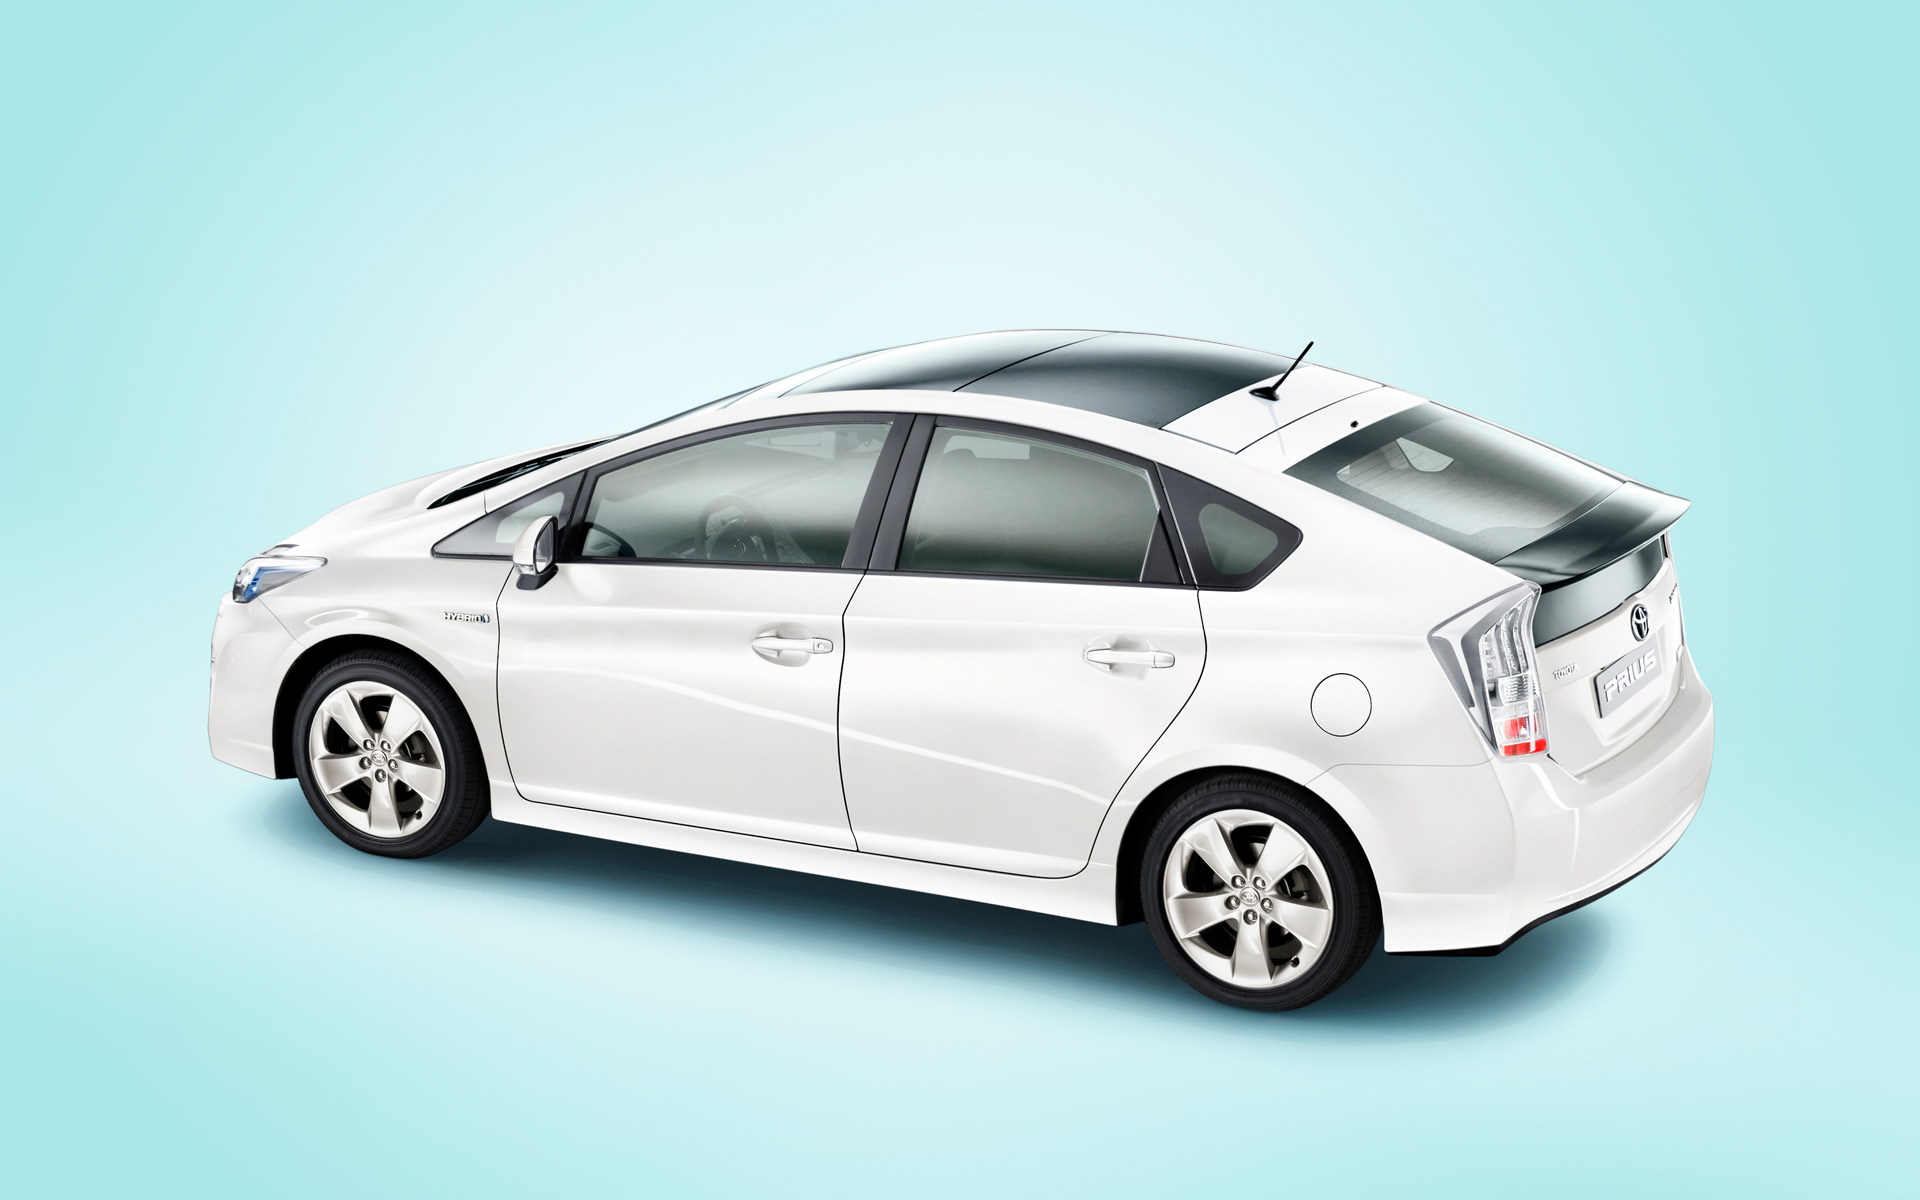 New Toyota Prius Wallpaper Full HD Pictures